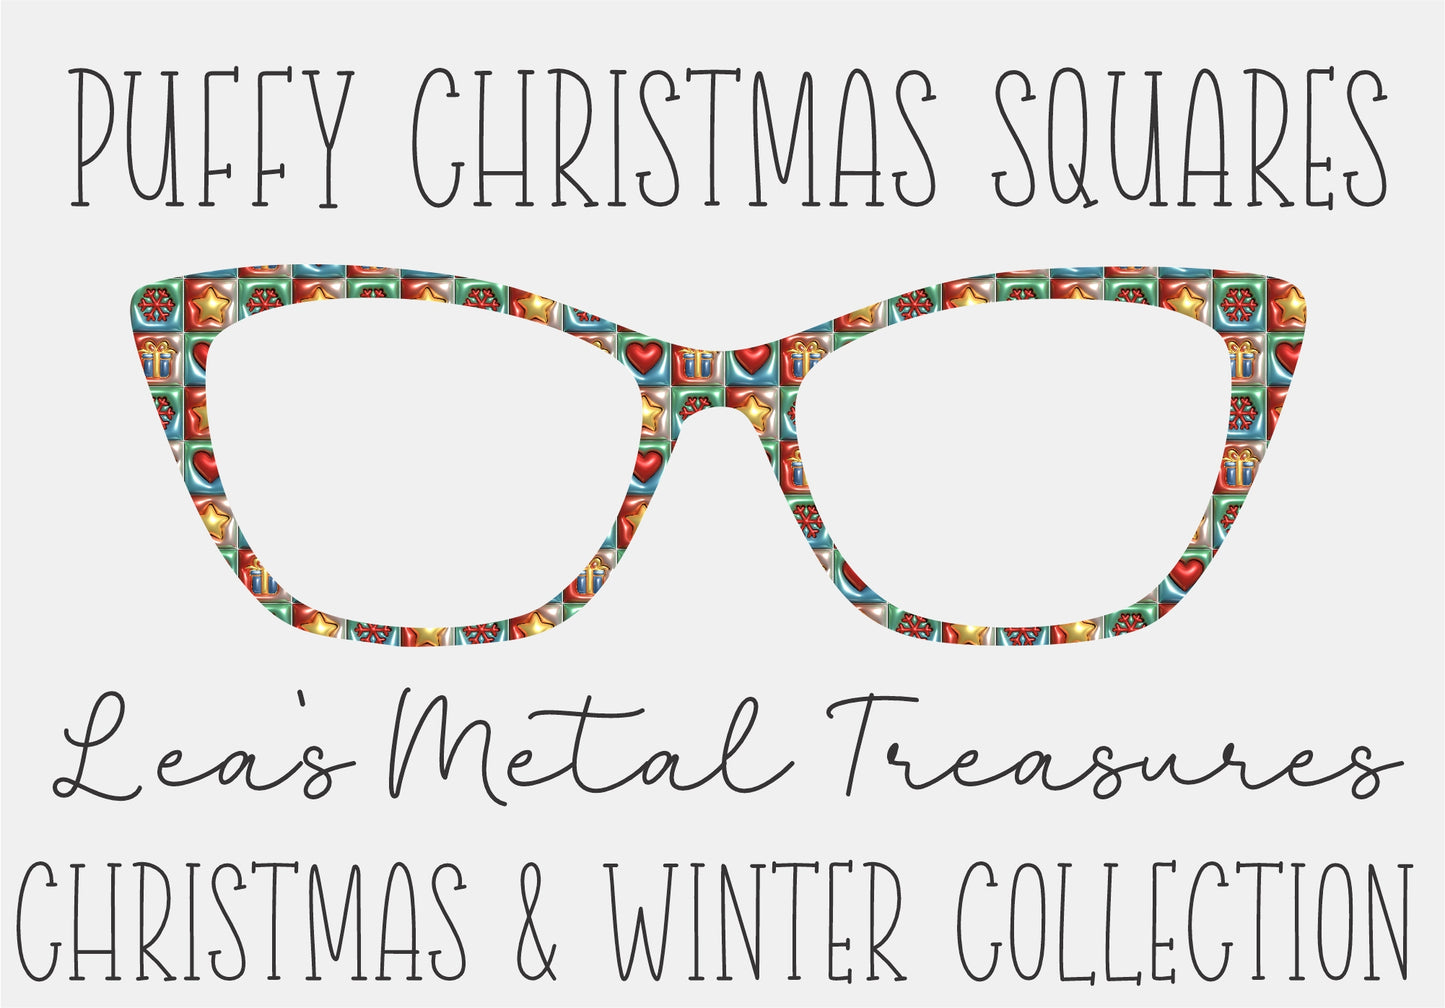 PUFFY CHRISTMAS SQUARES Eyewear Frame Toppers COMES WITH MAGNETS